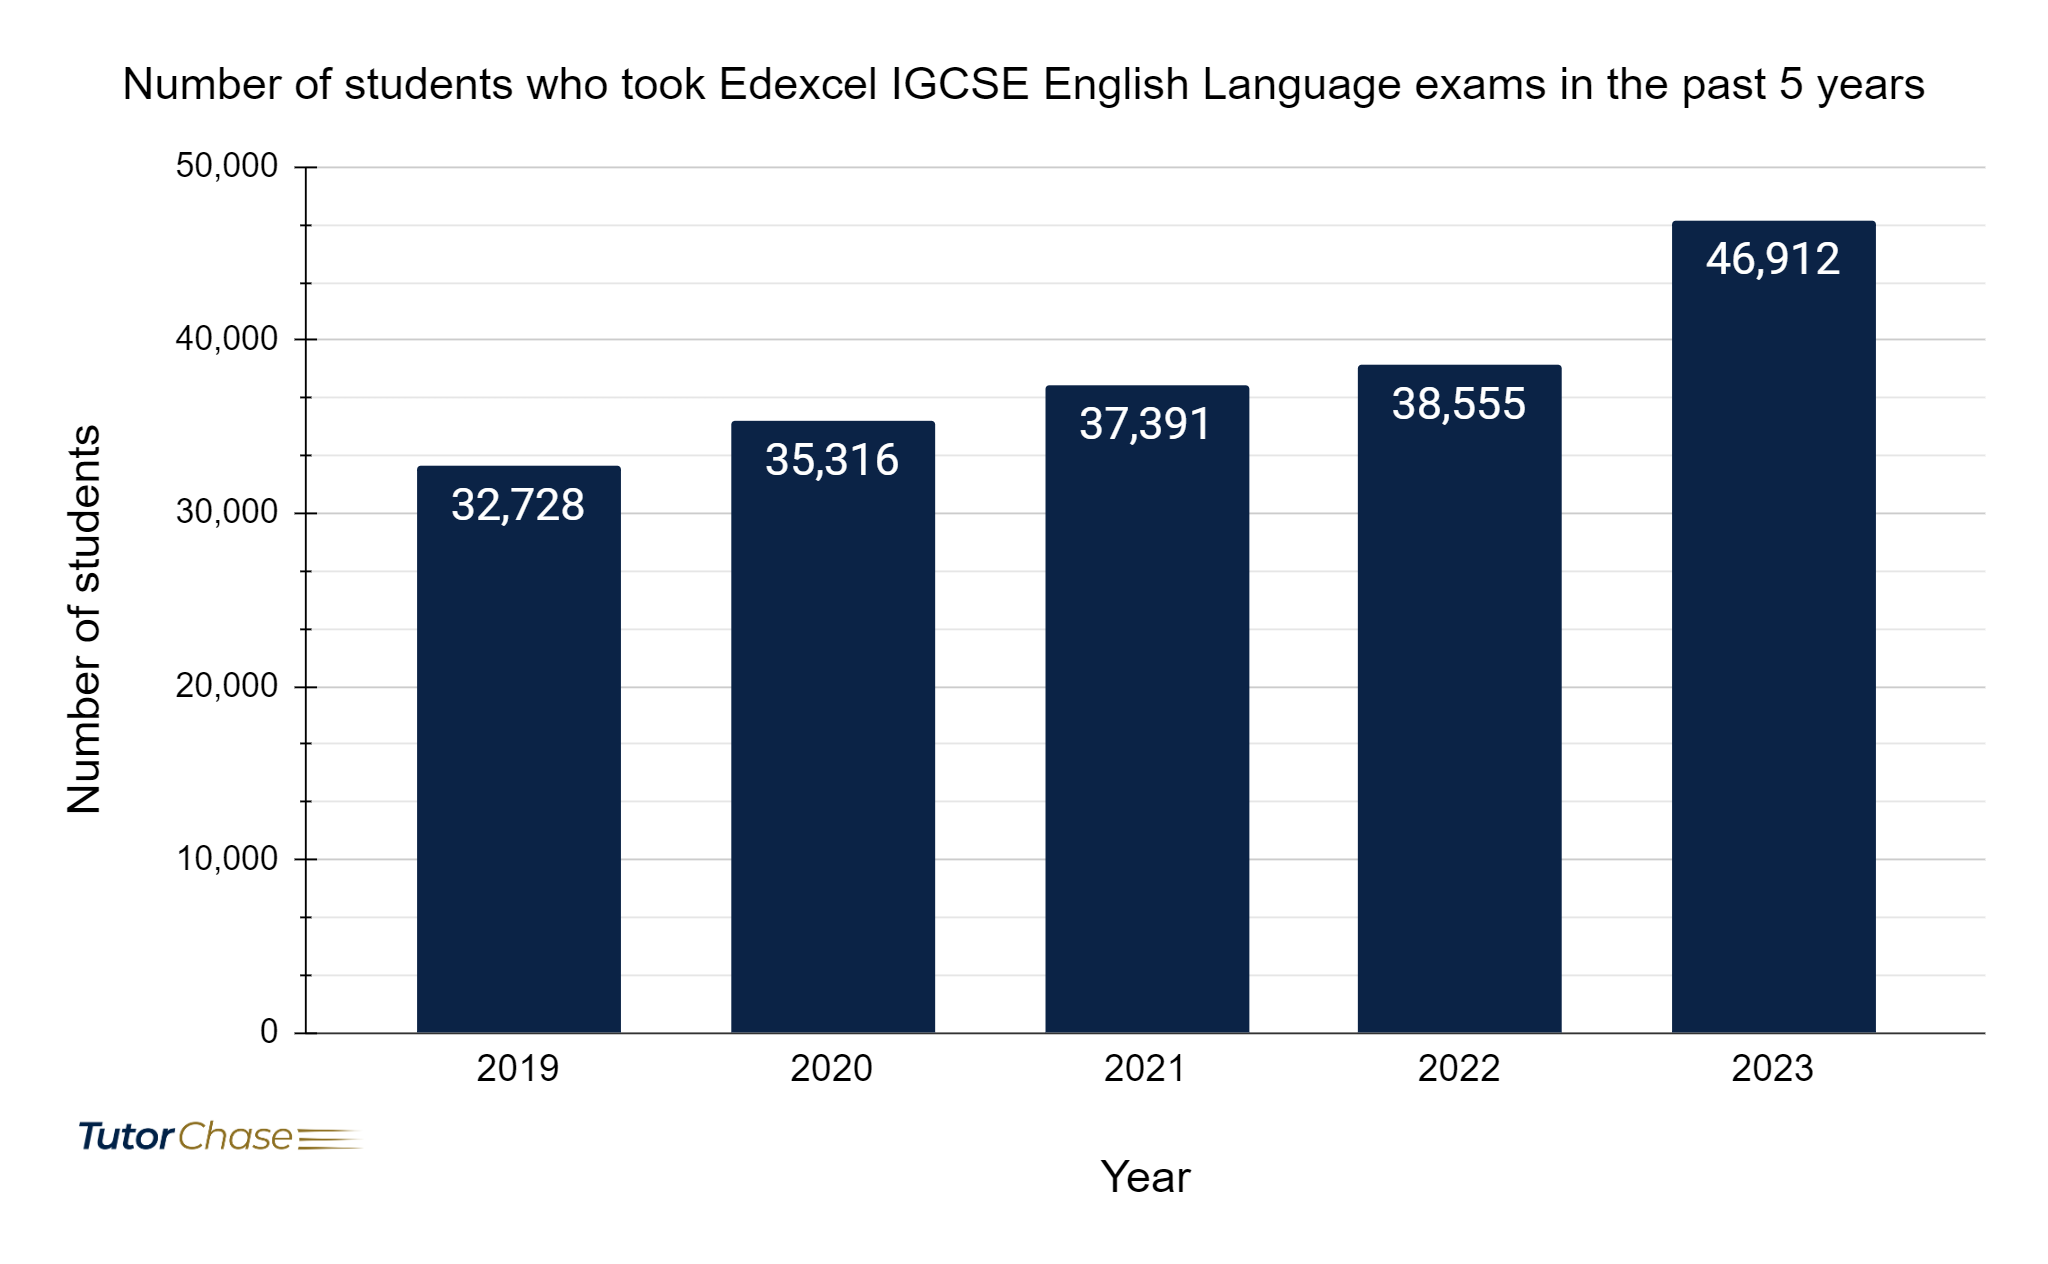 Number of students who took Edexcel IGCSE English Language exams in the past 5 years